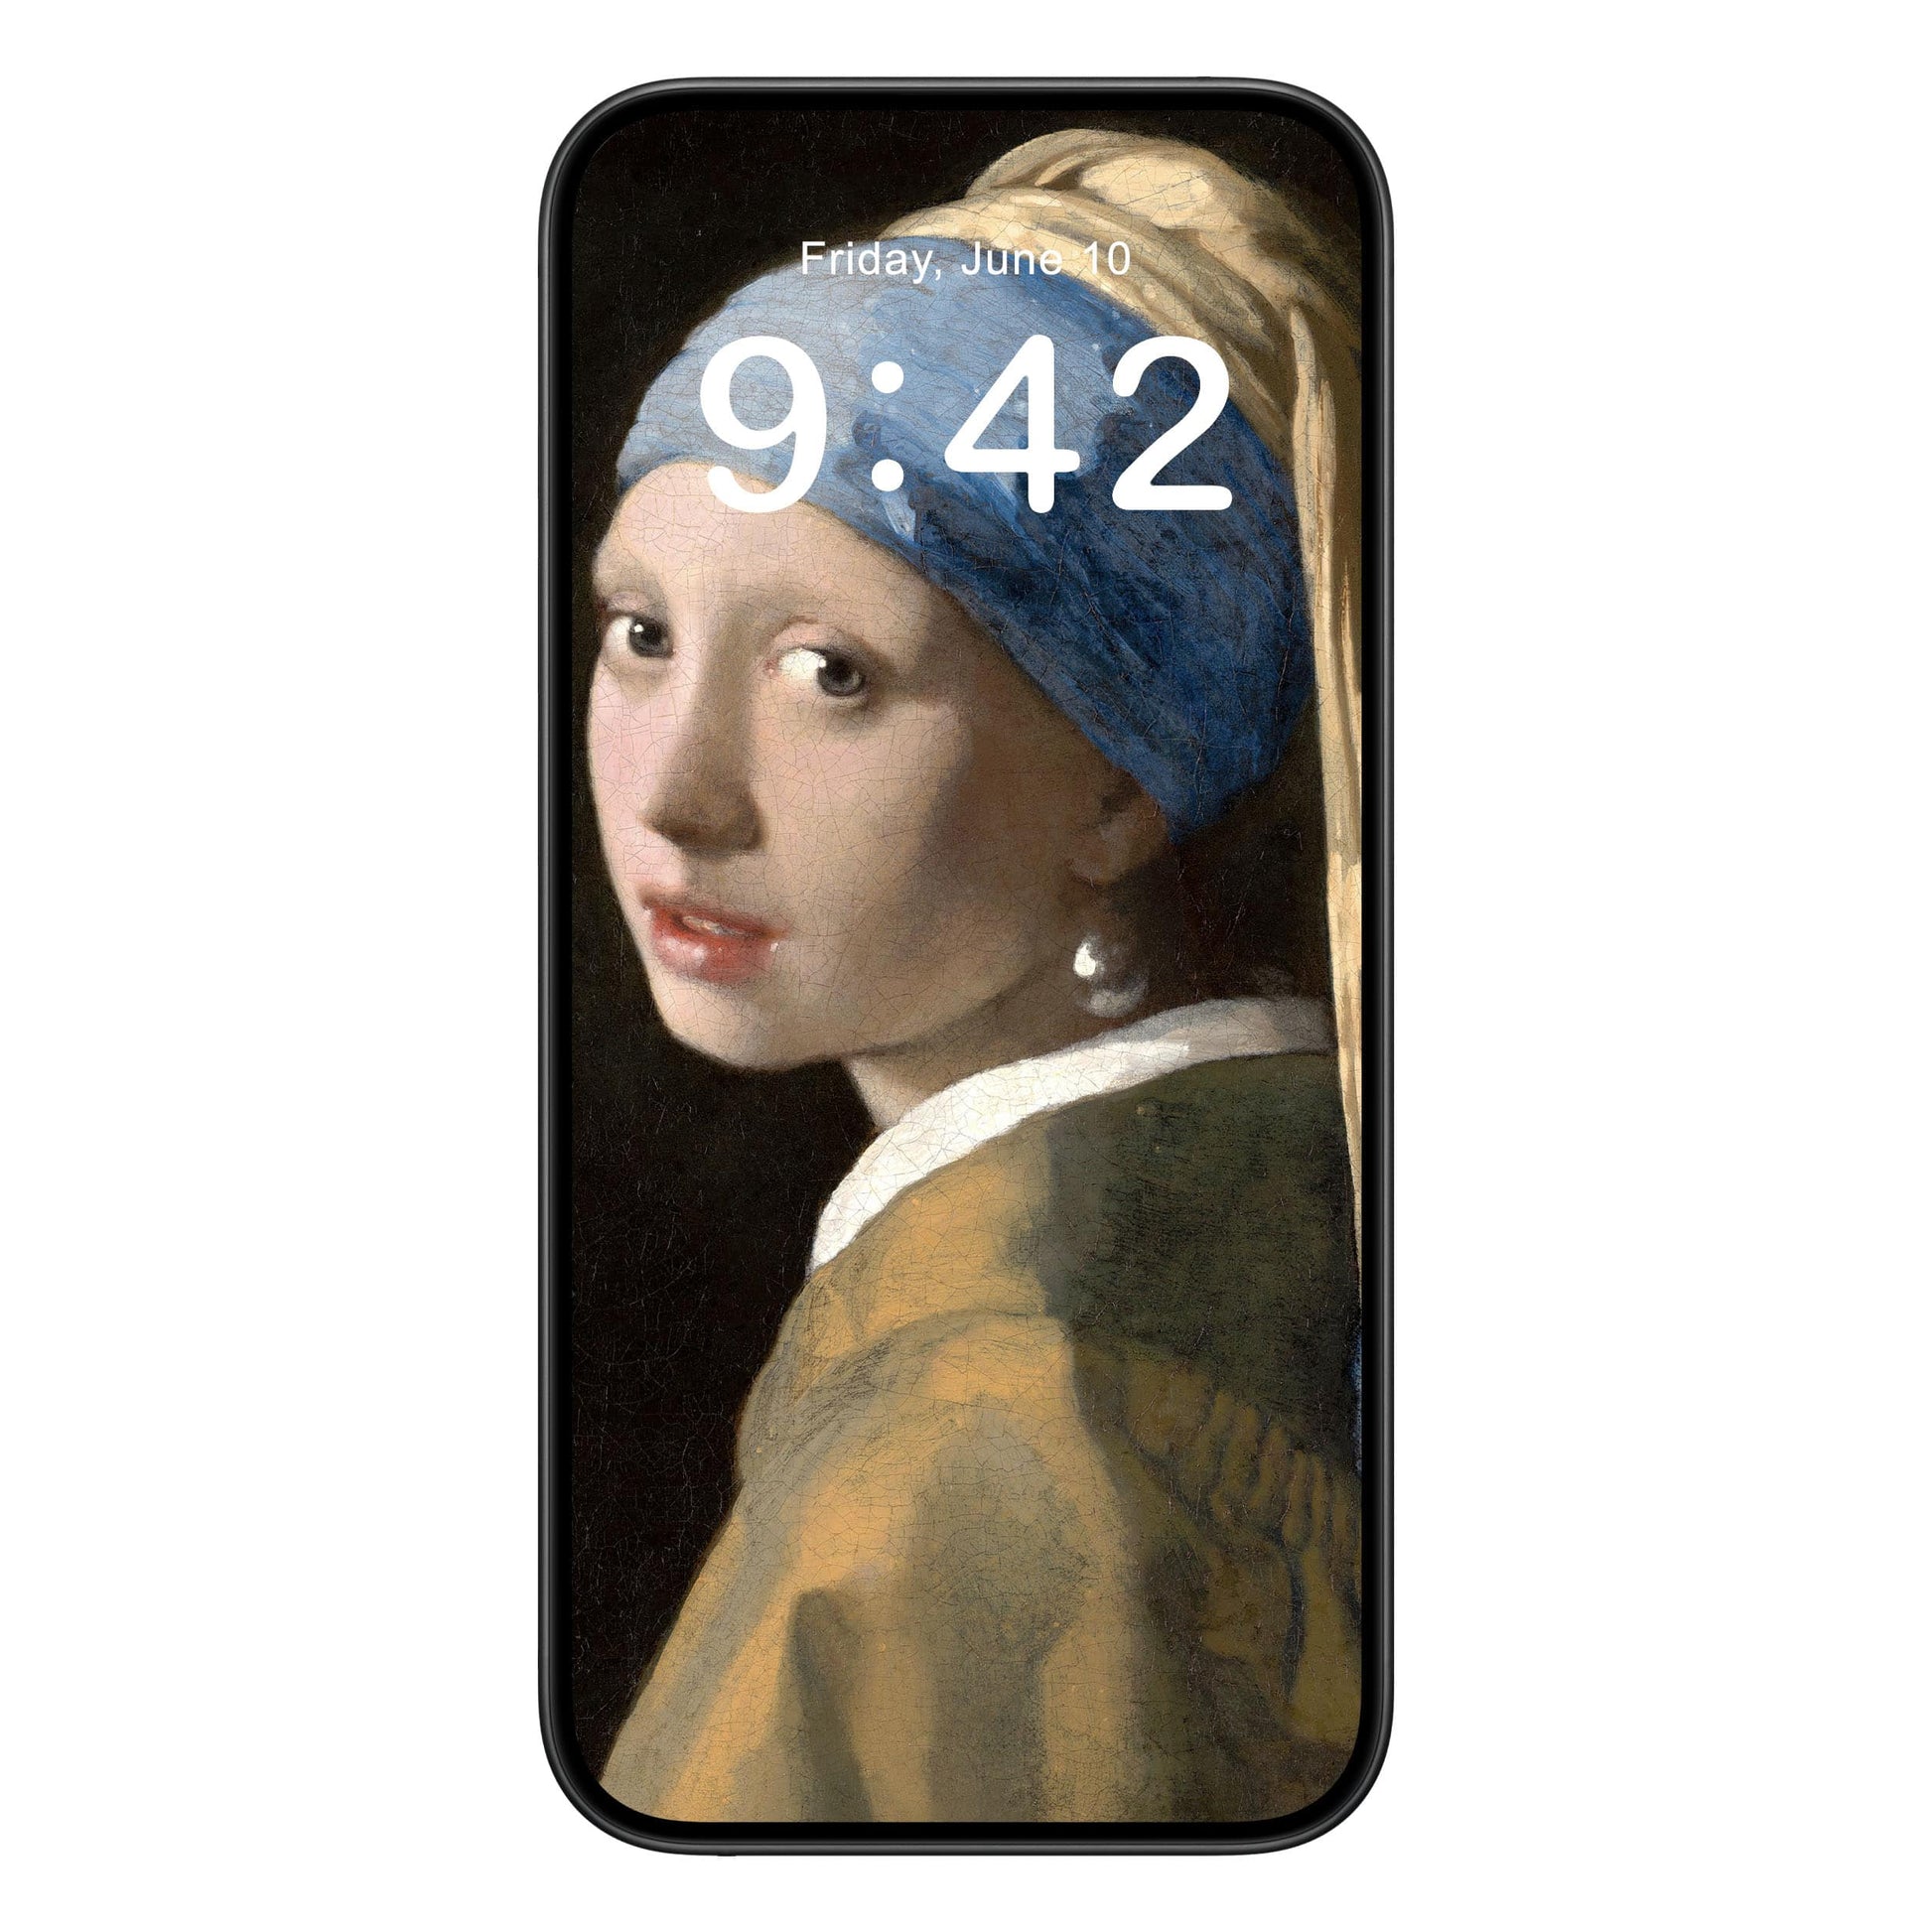 Girl with a Pearl Earring phone wallpaper background with vermeer paining design shown on a phone lock screen, instant download available.